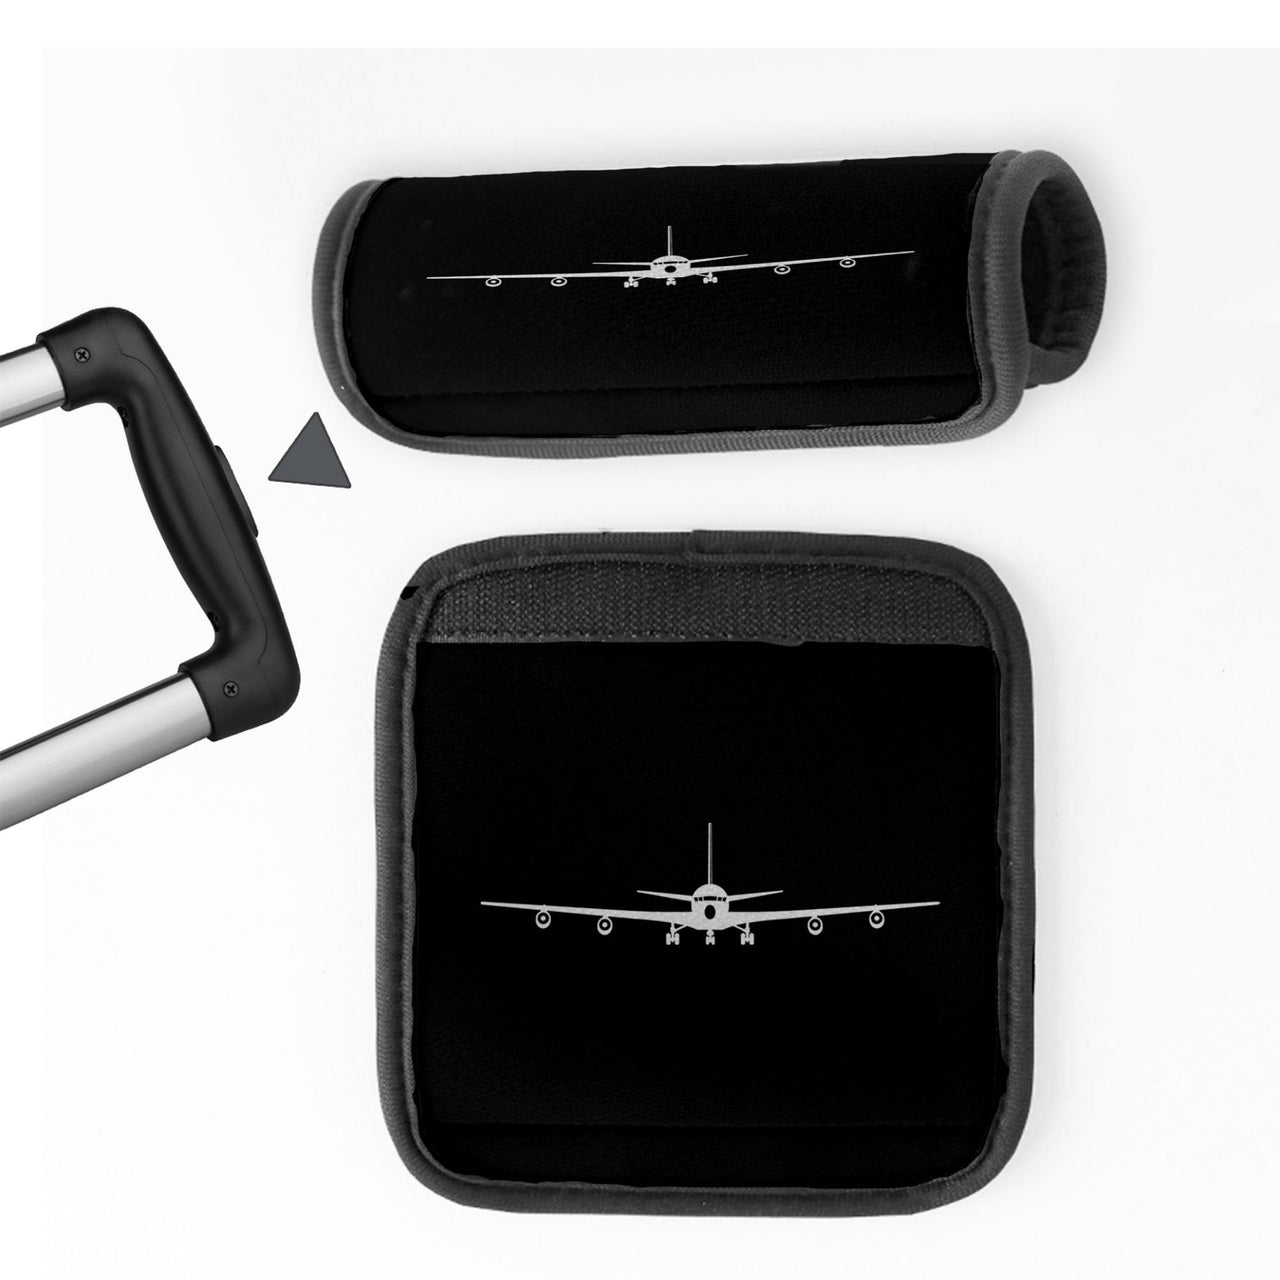 Boeing 707 Silhouette Designed Neoprene Luggage Handle Covers